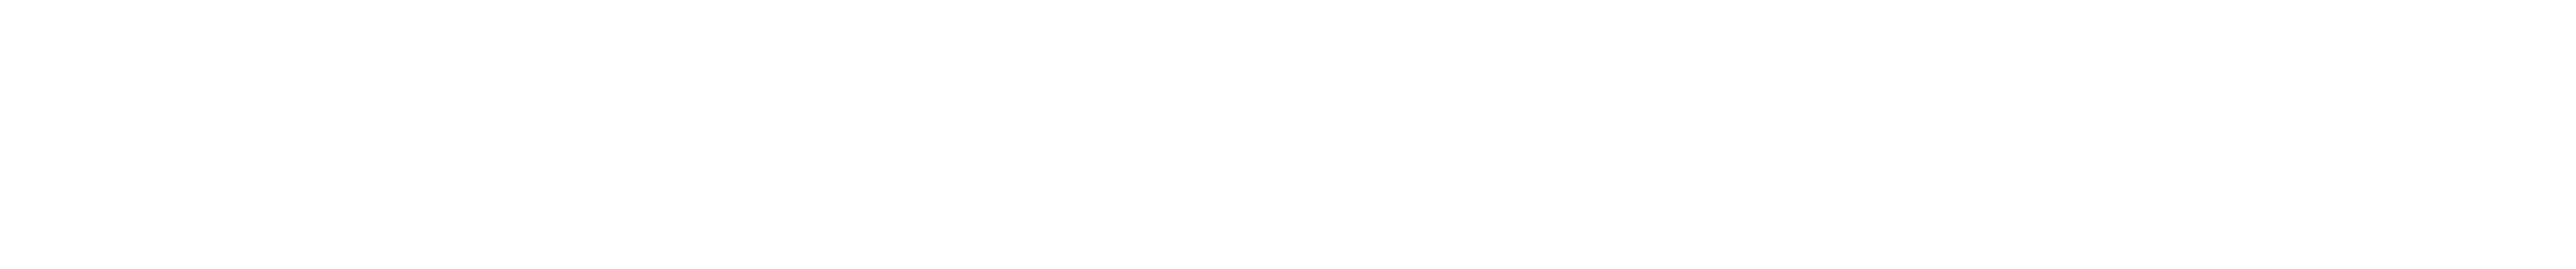 Aggie Muster Logo